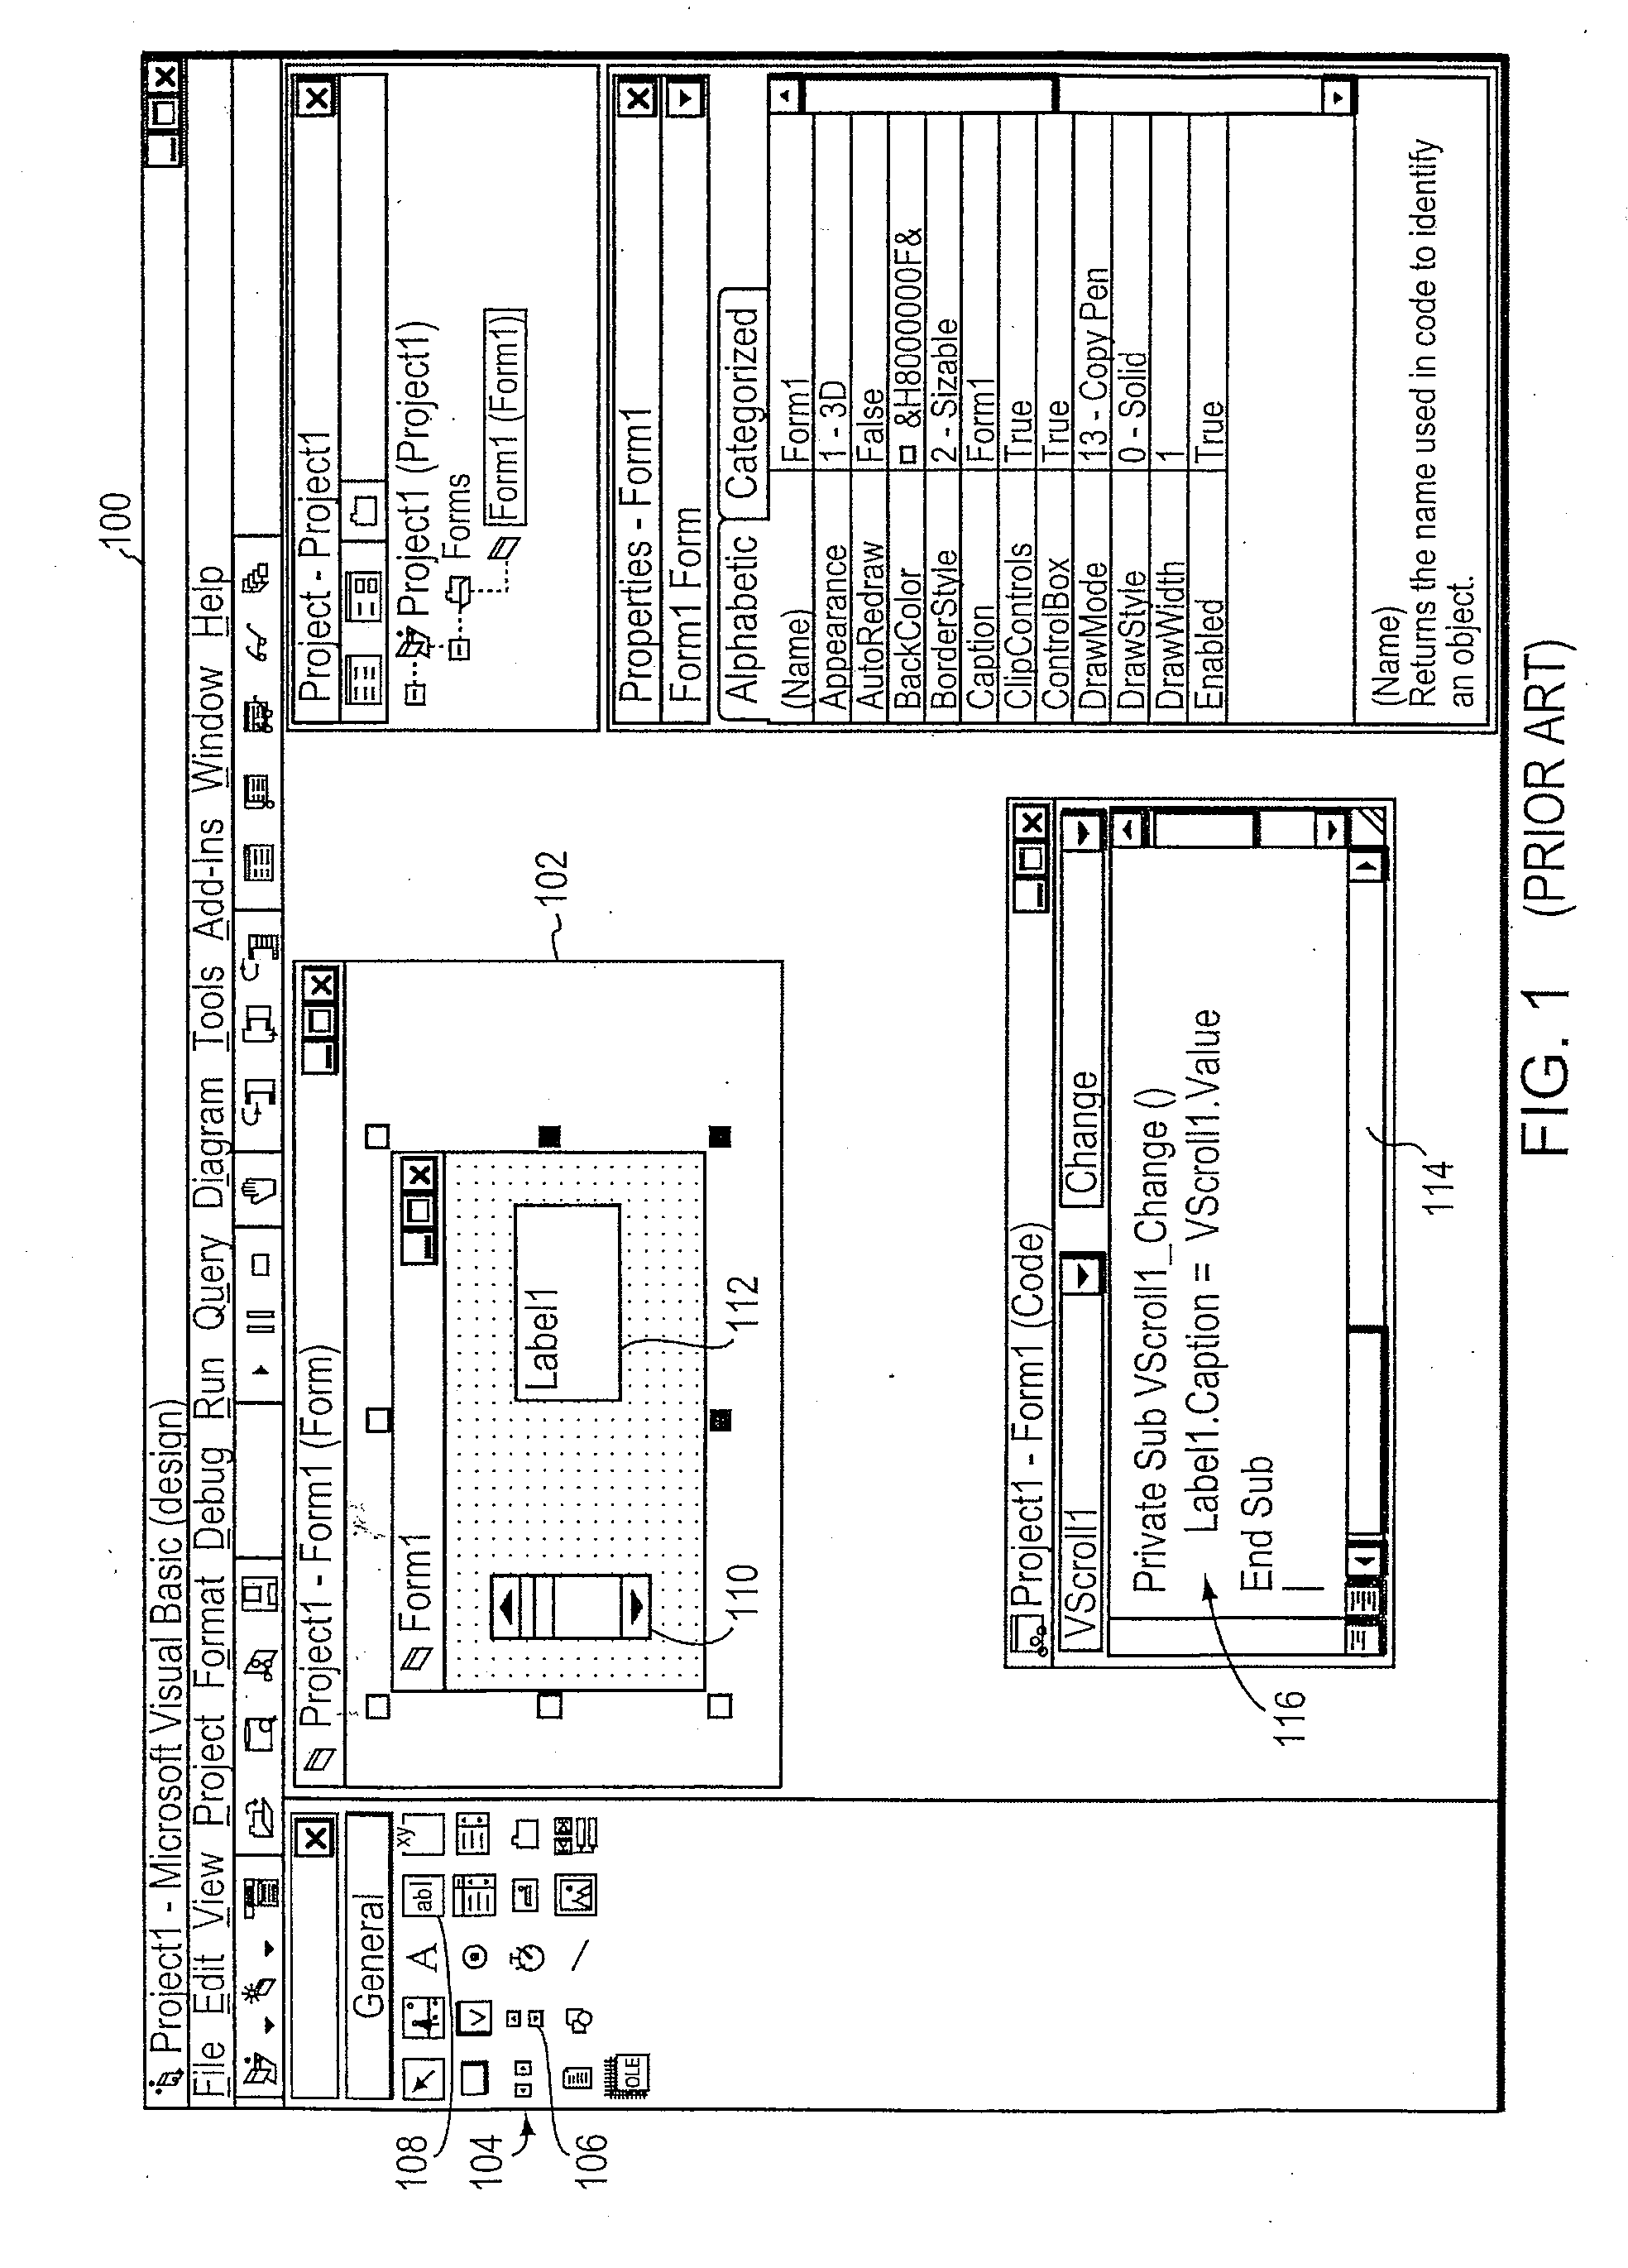 Graphical Program Having Graphical and/or Textual Specification of Event Handler Procedures for Program Objects